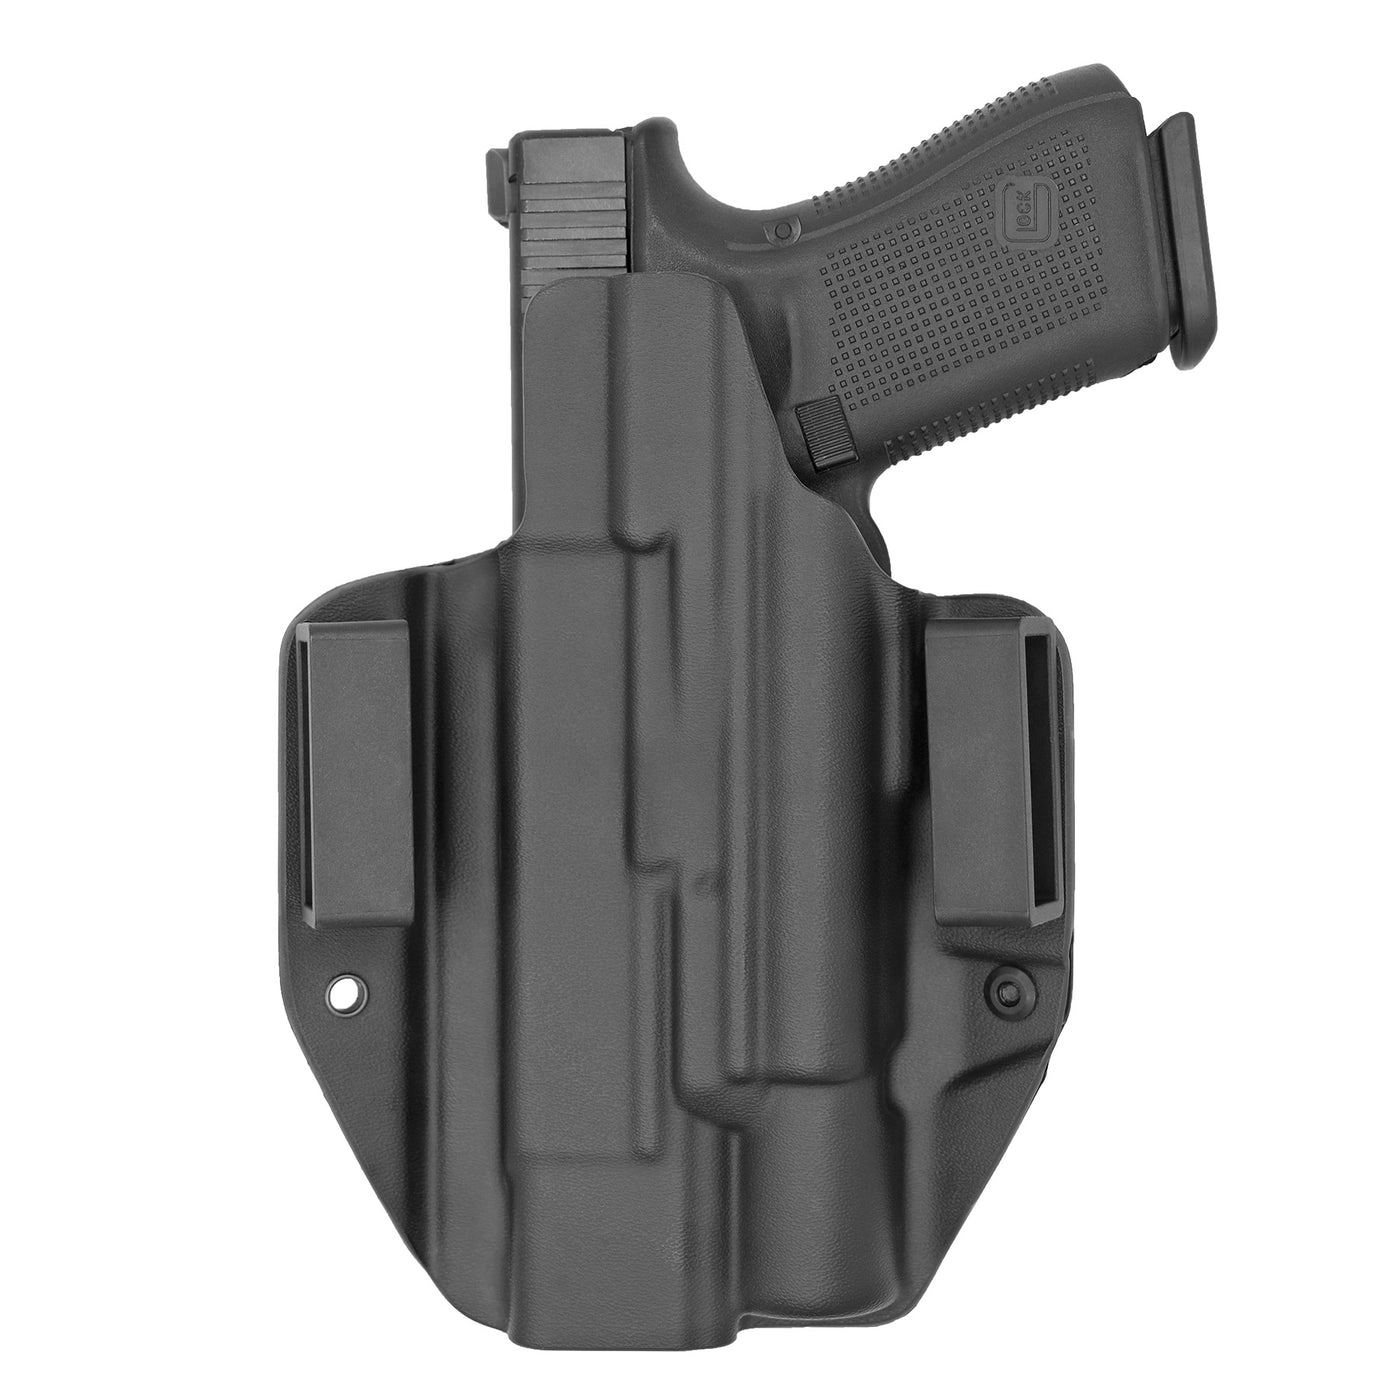 C&G Holsters custom OWB Tactical CZ P10 Surefire X300 in holstered position back view